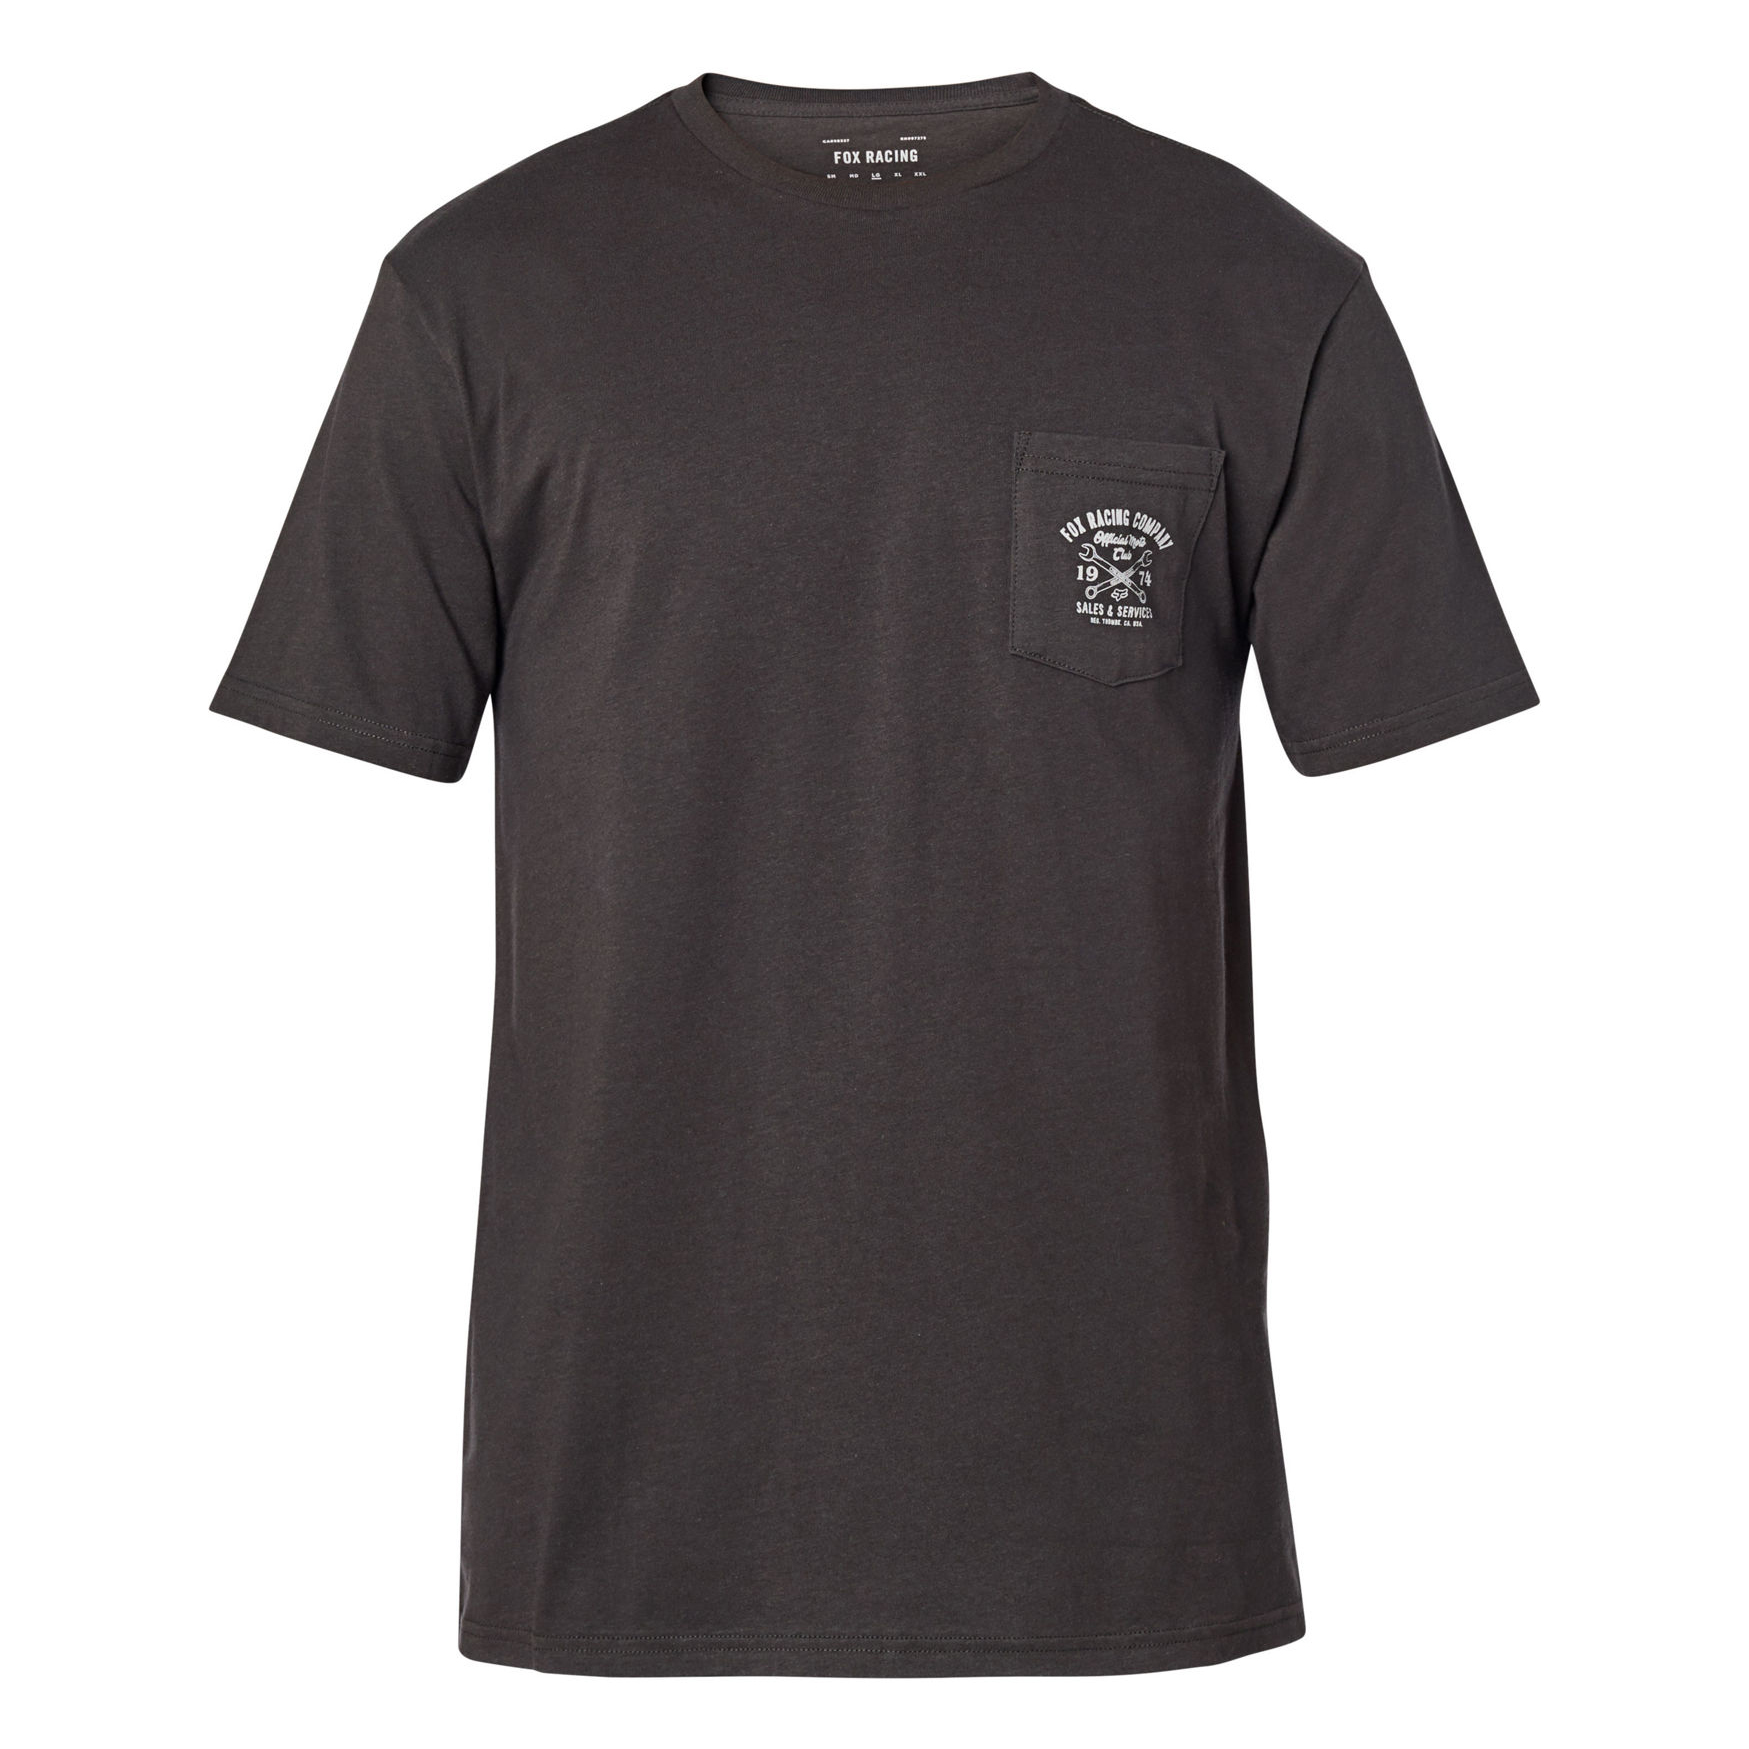 Fox Apparel | Wrenched Pocket Premium SS T-Shirt Men's | Size Small in Black Vintage